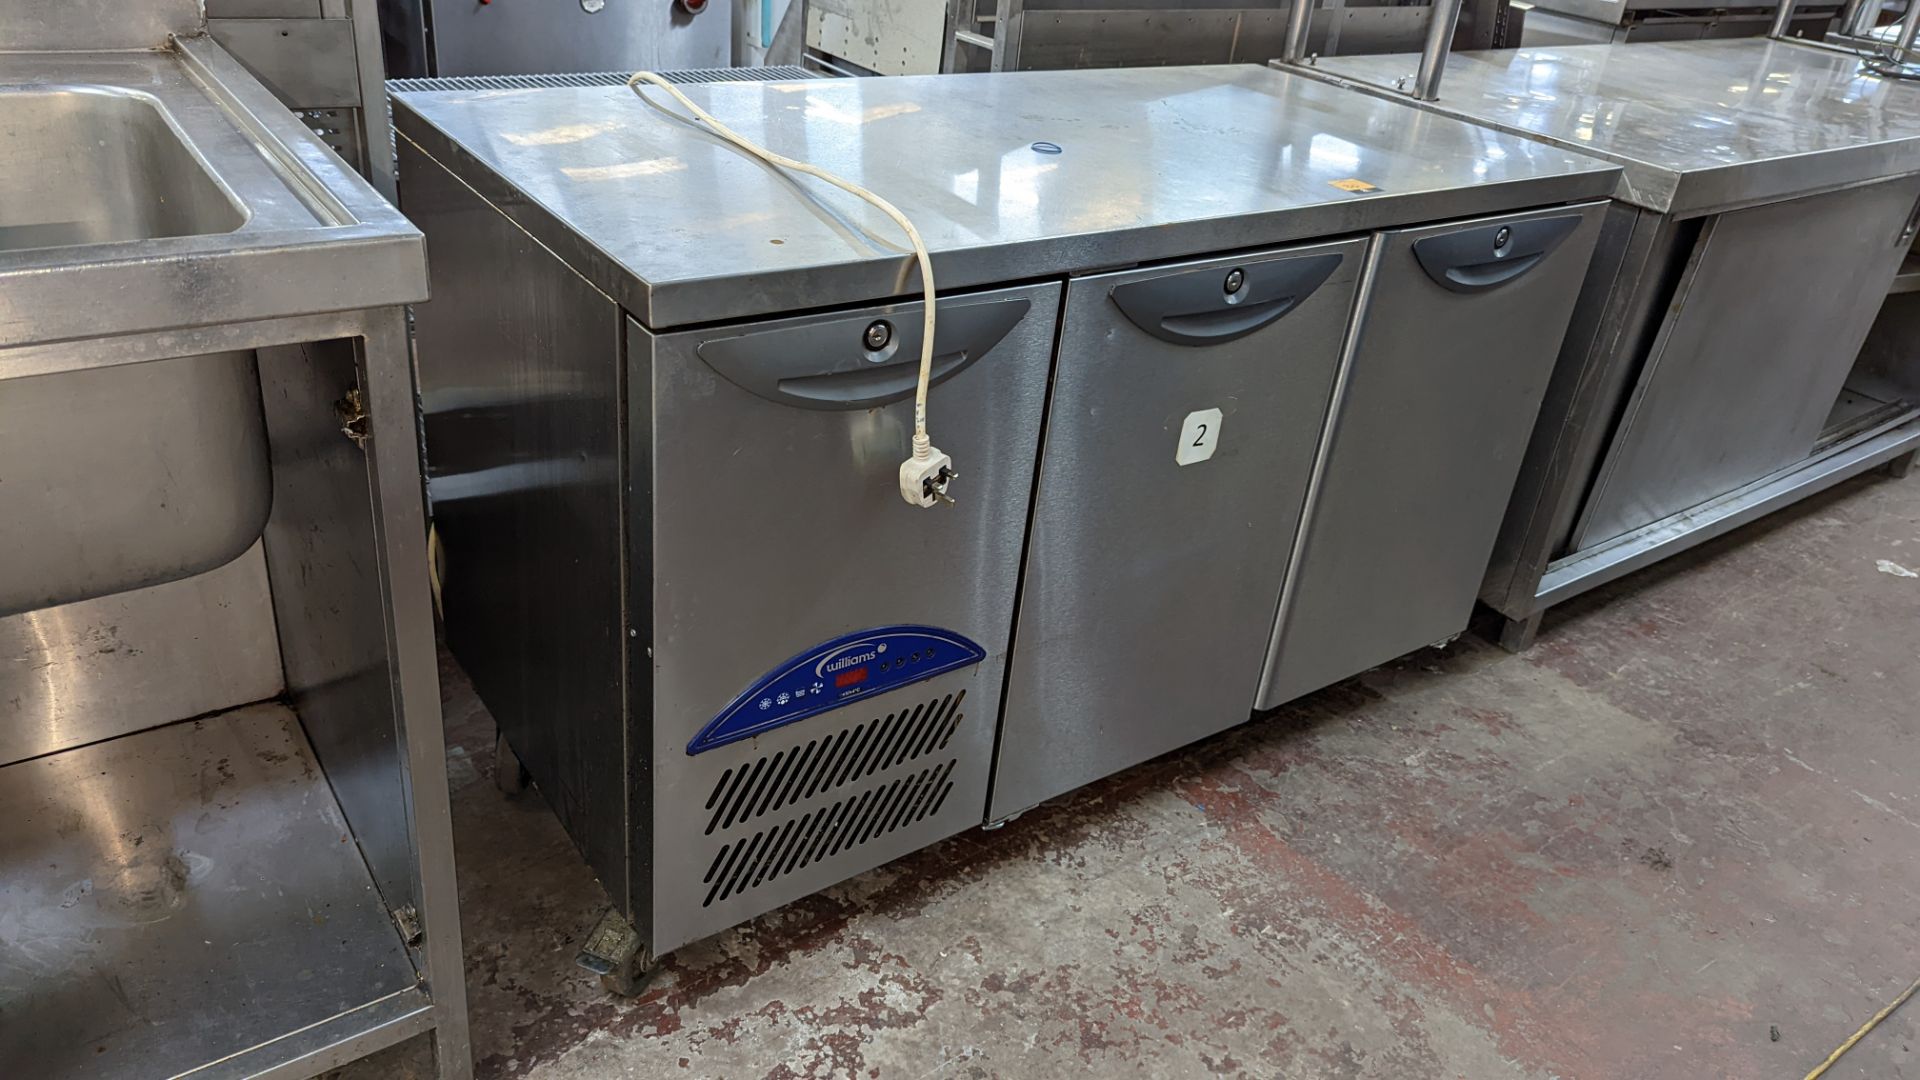 Williams stainless steel refrigerated multicompartment mobile prep cabinet - Image 4 of 6